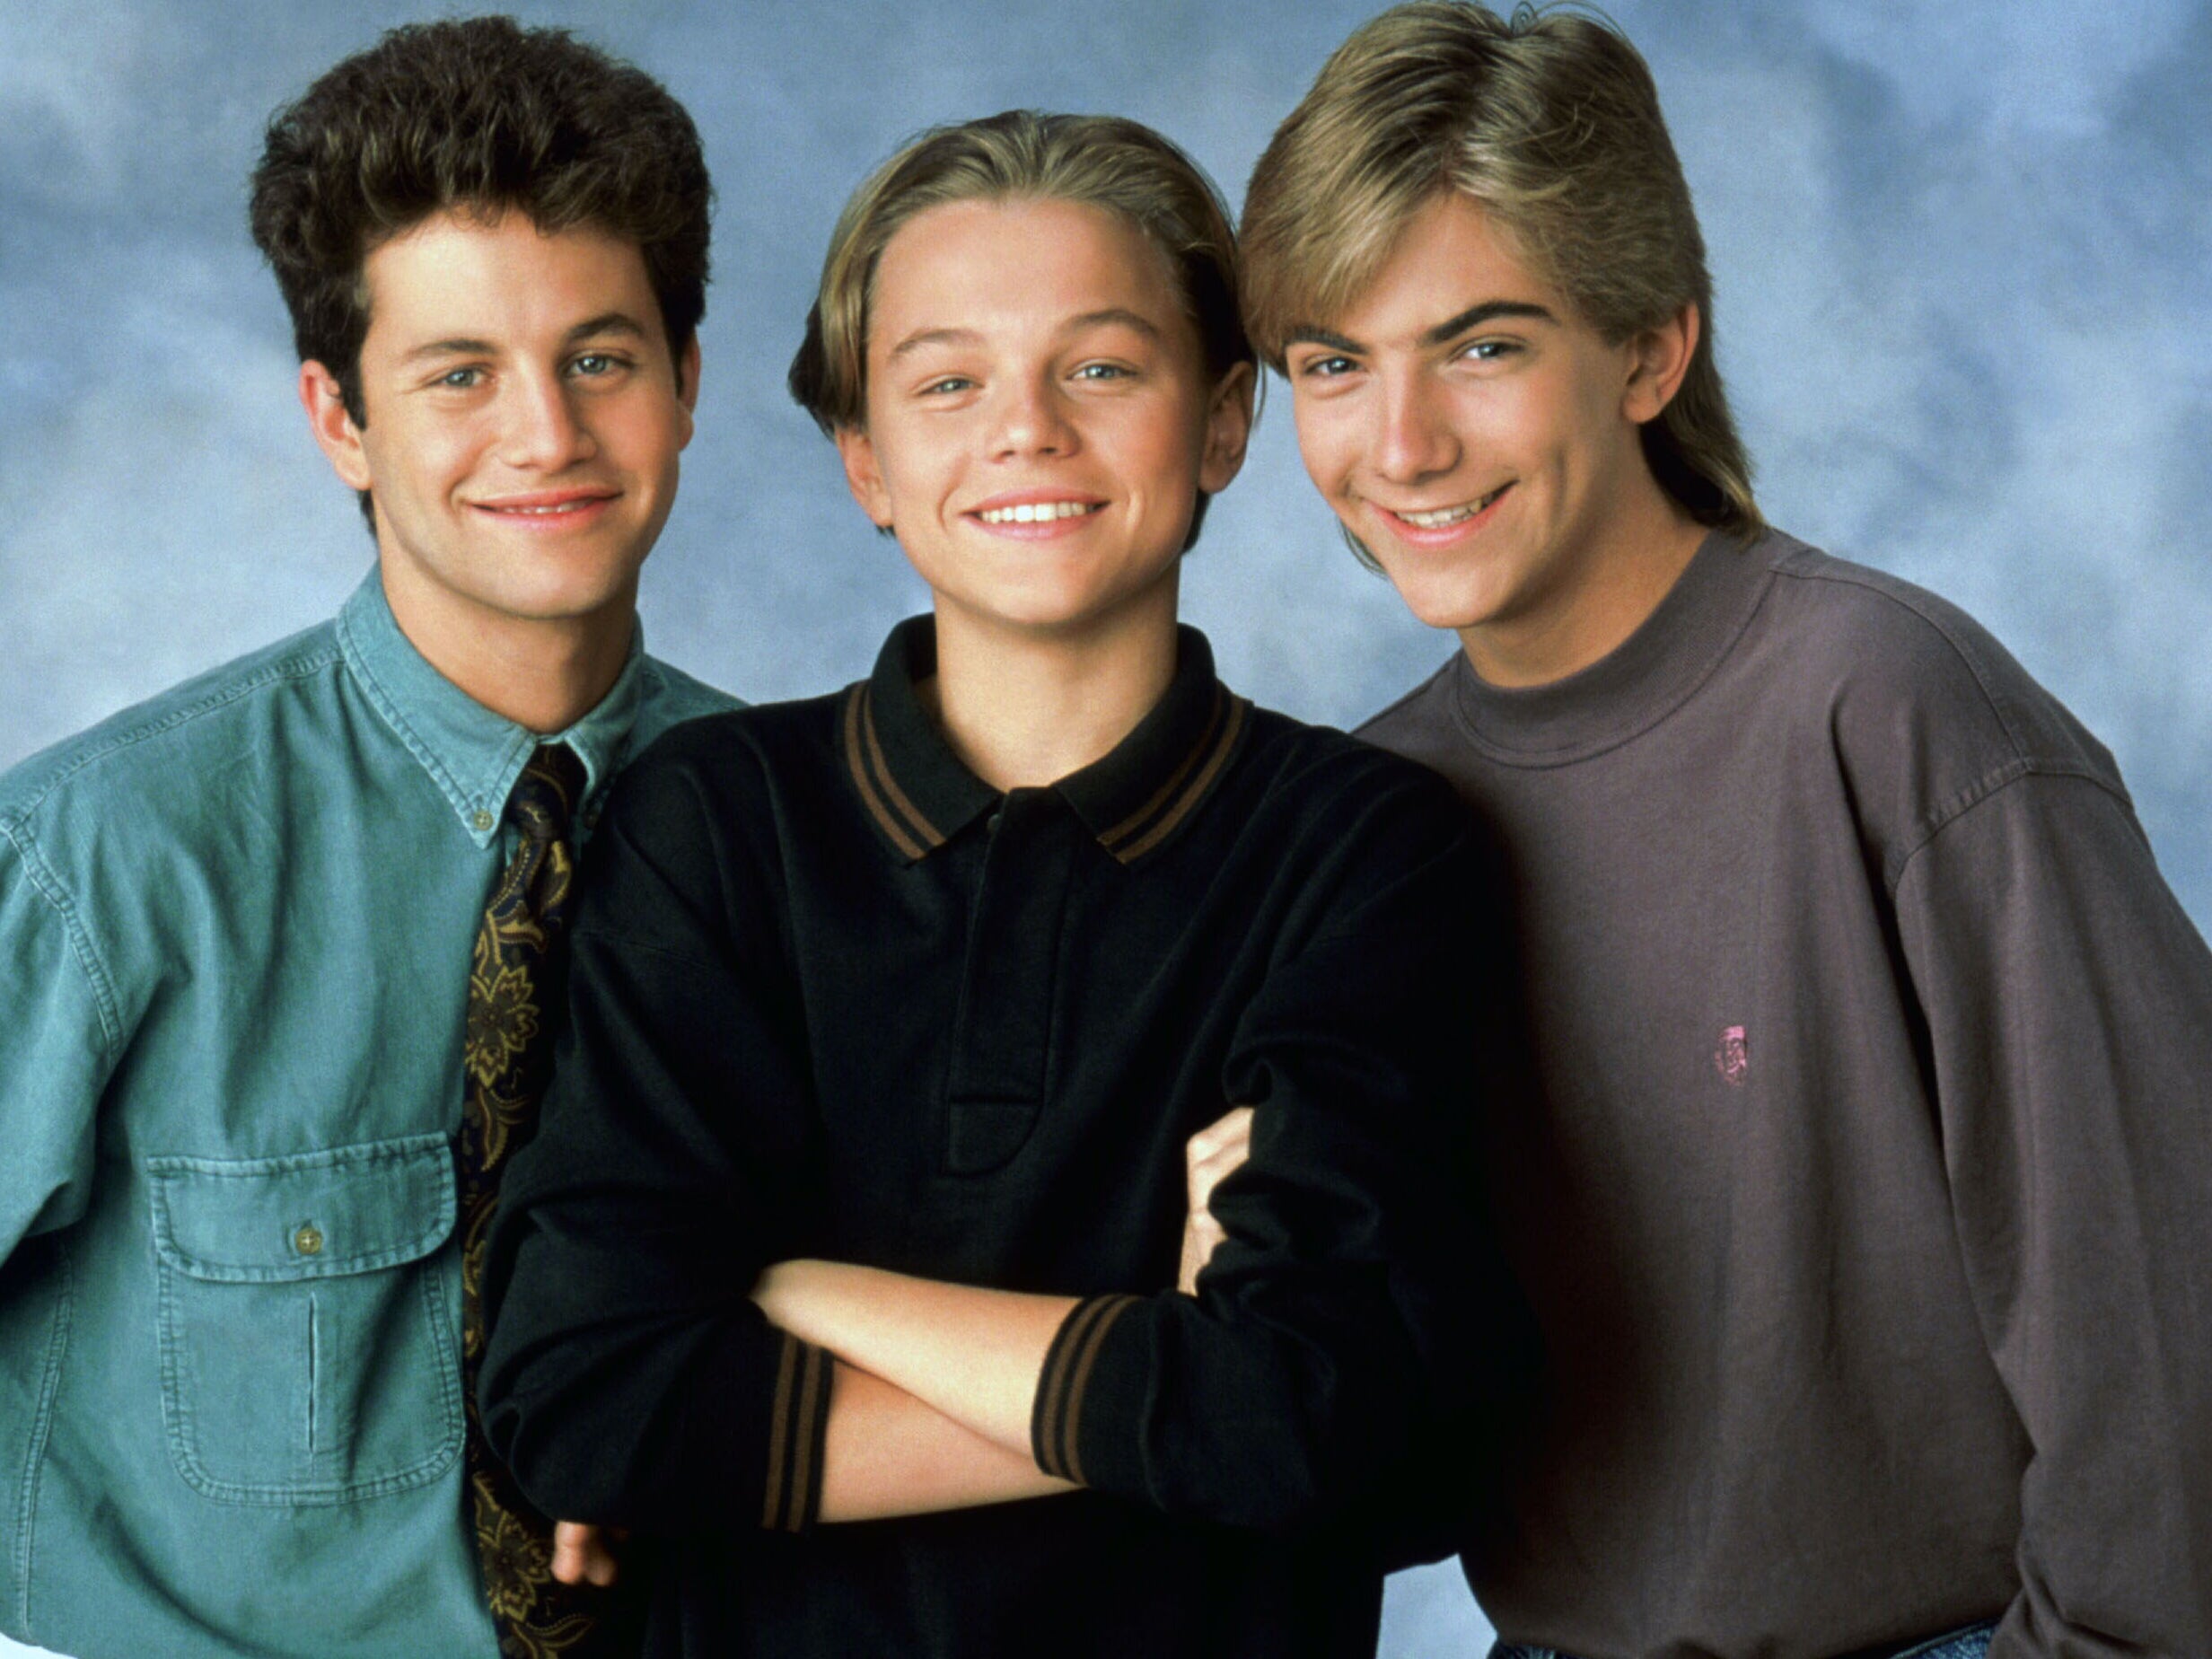 Kirk Cameron (left) and Jeremy Miller with Leonardo DiCaprio (centre) in a season 7 promotional image for US series ‘Growing Pains'